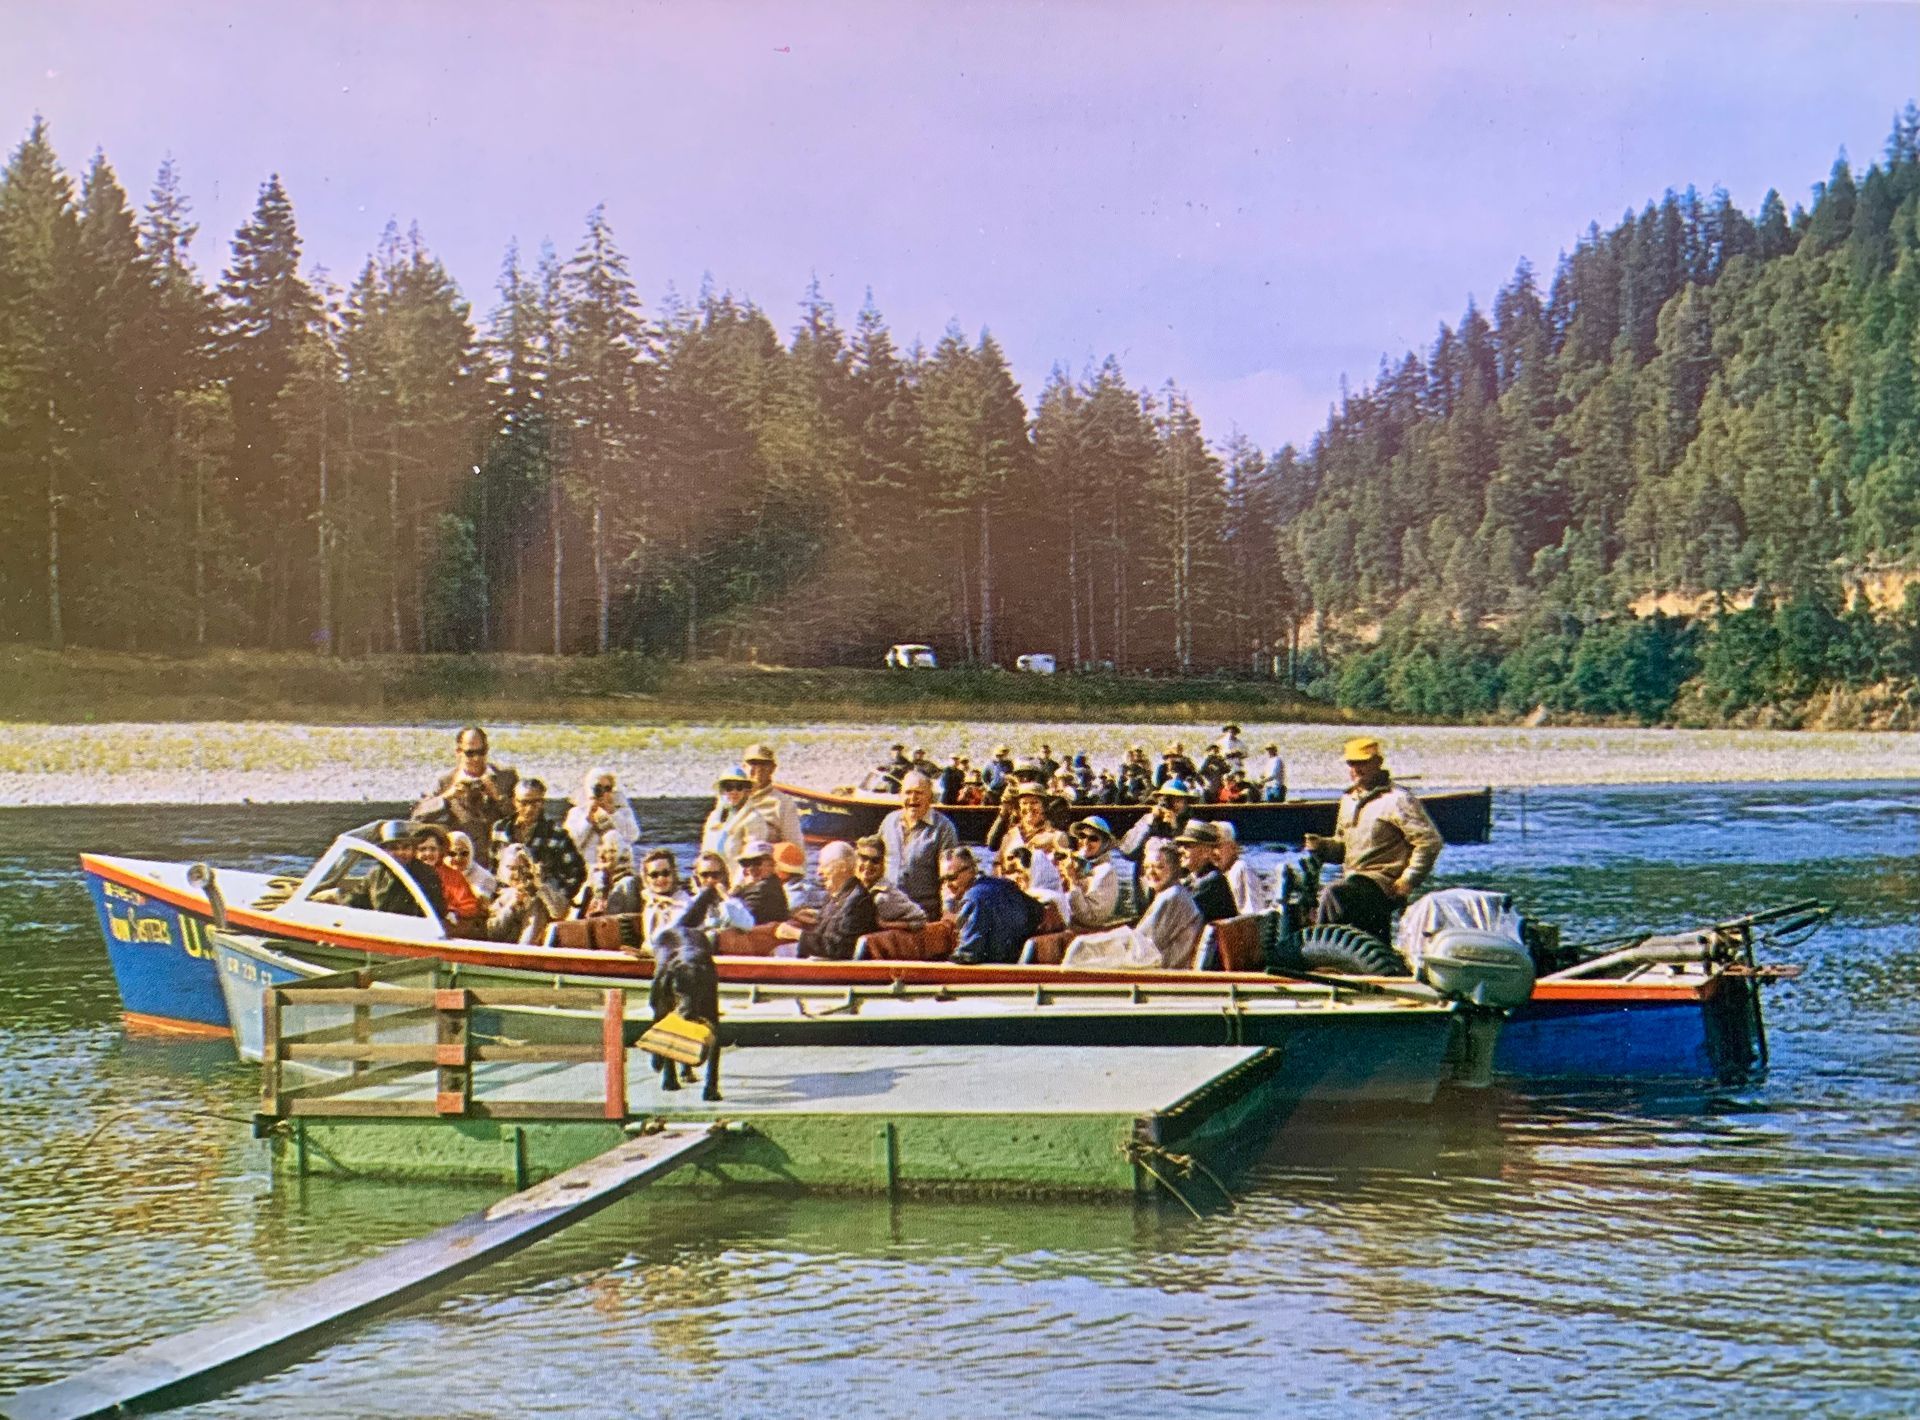 a group of people on a boat parked at a dock